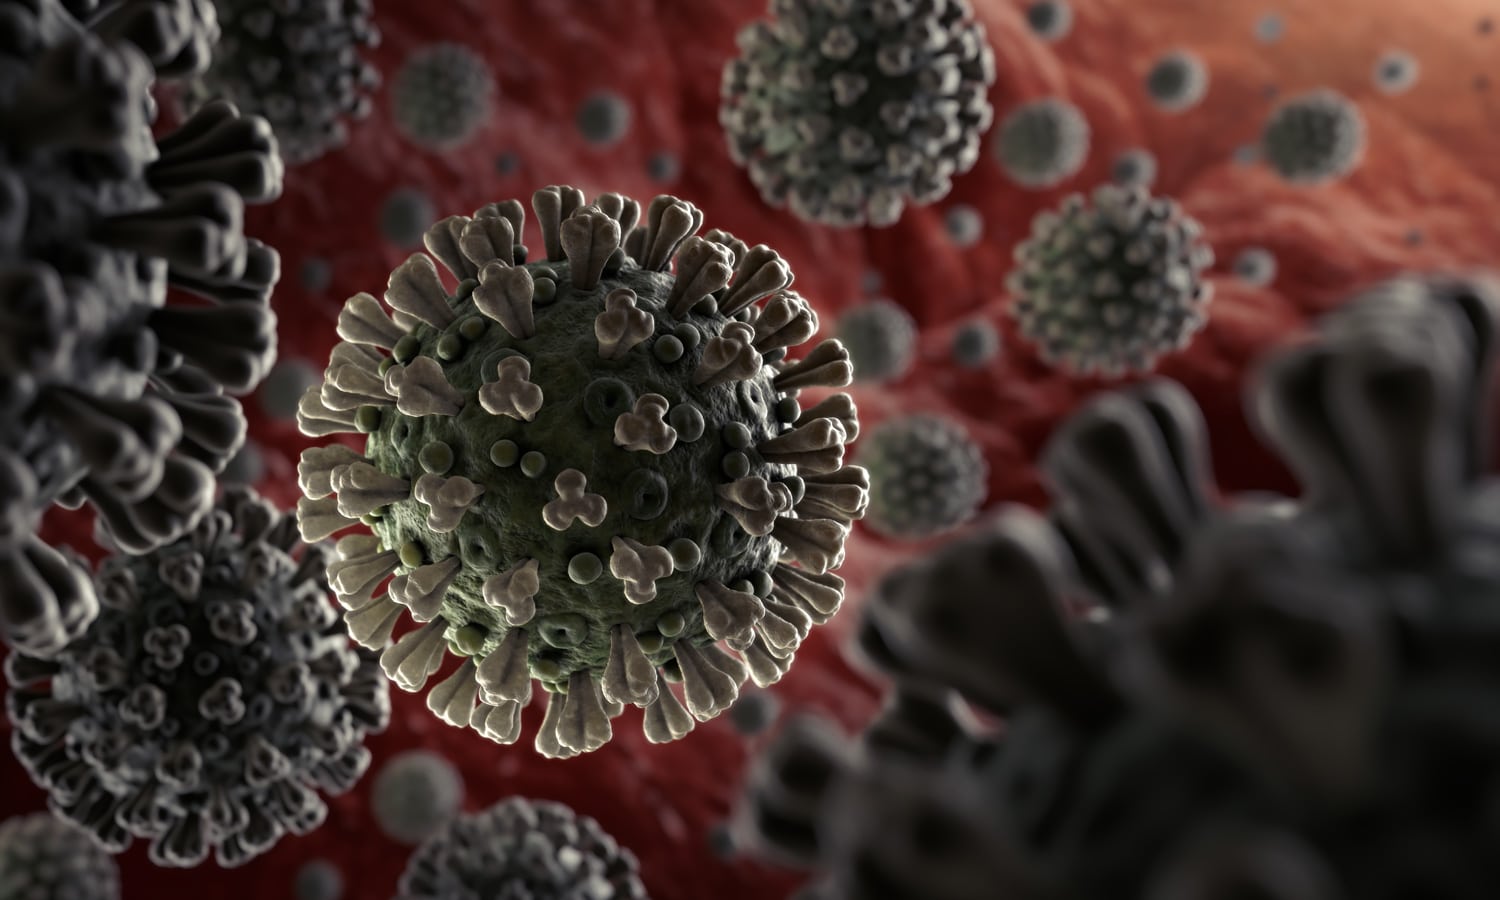 What The Coronavirus Has Taught Us About Safe Drug Use